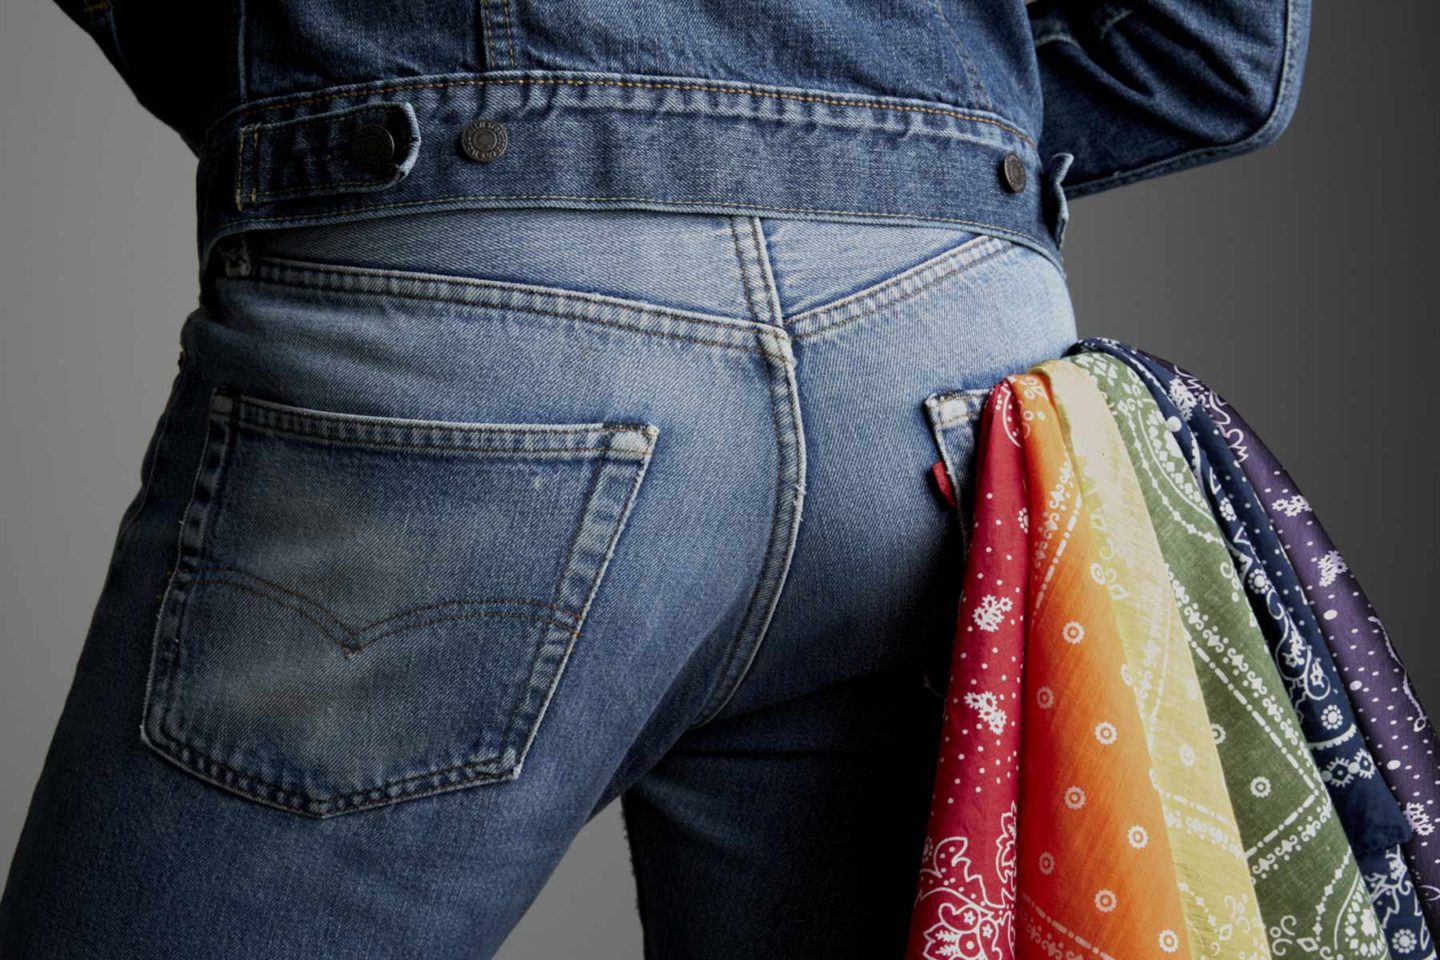 4 Levi’s Jeans To Wear This Summer For Men